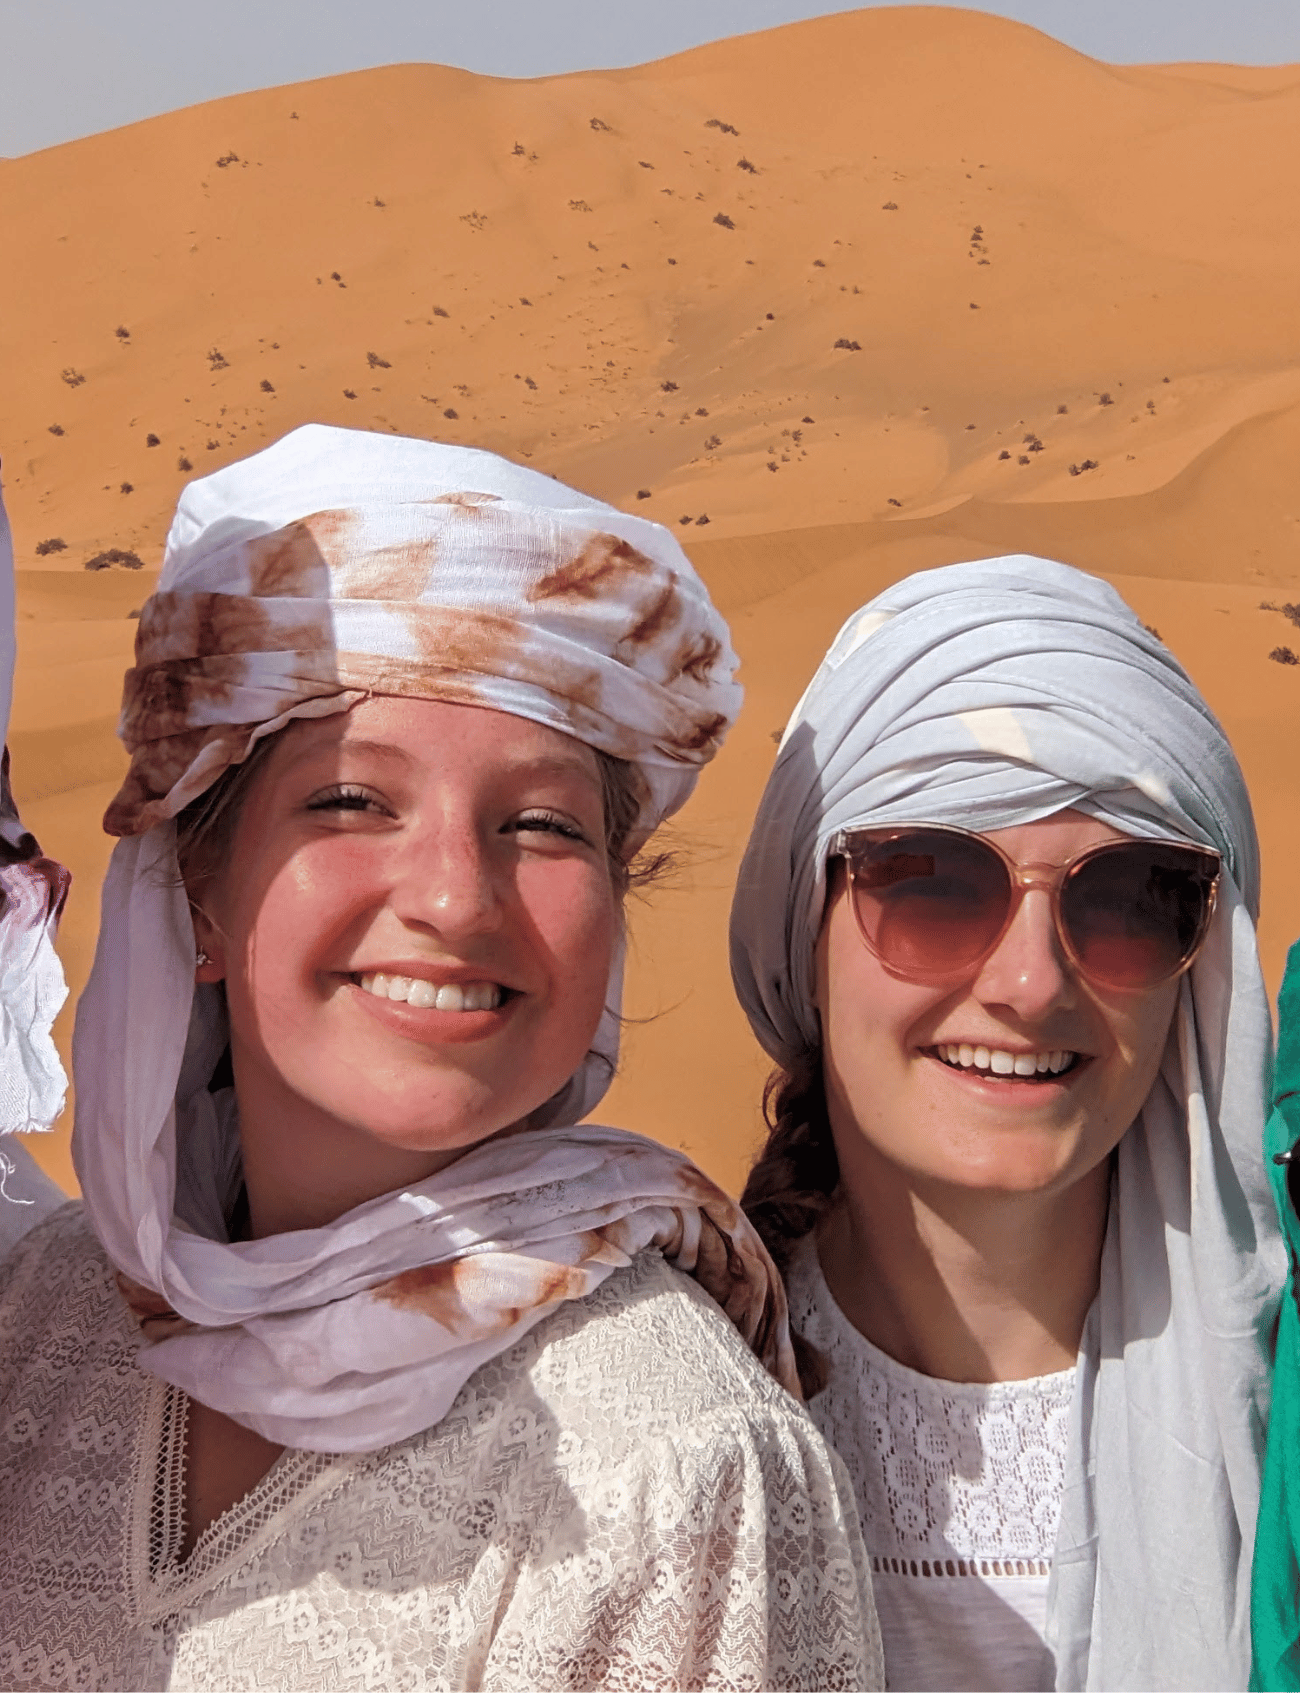 best cultural trip in morocco, two joyful travelers smiling in the vast Moroccan desert, embodying the spirit of adventure and cultural immersion on their journey.